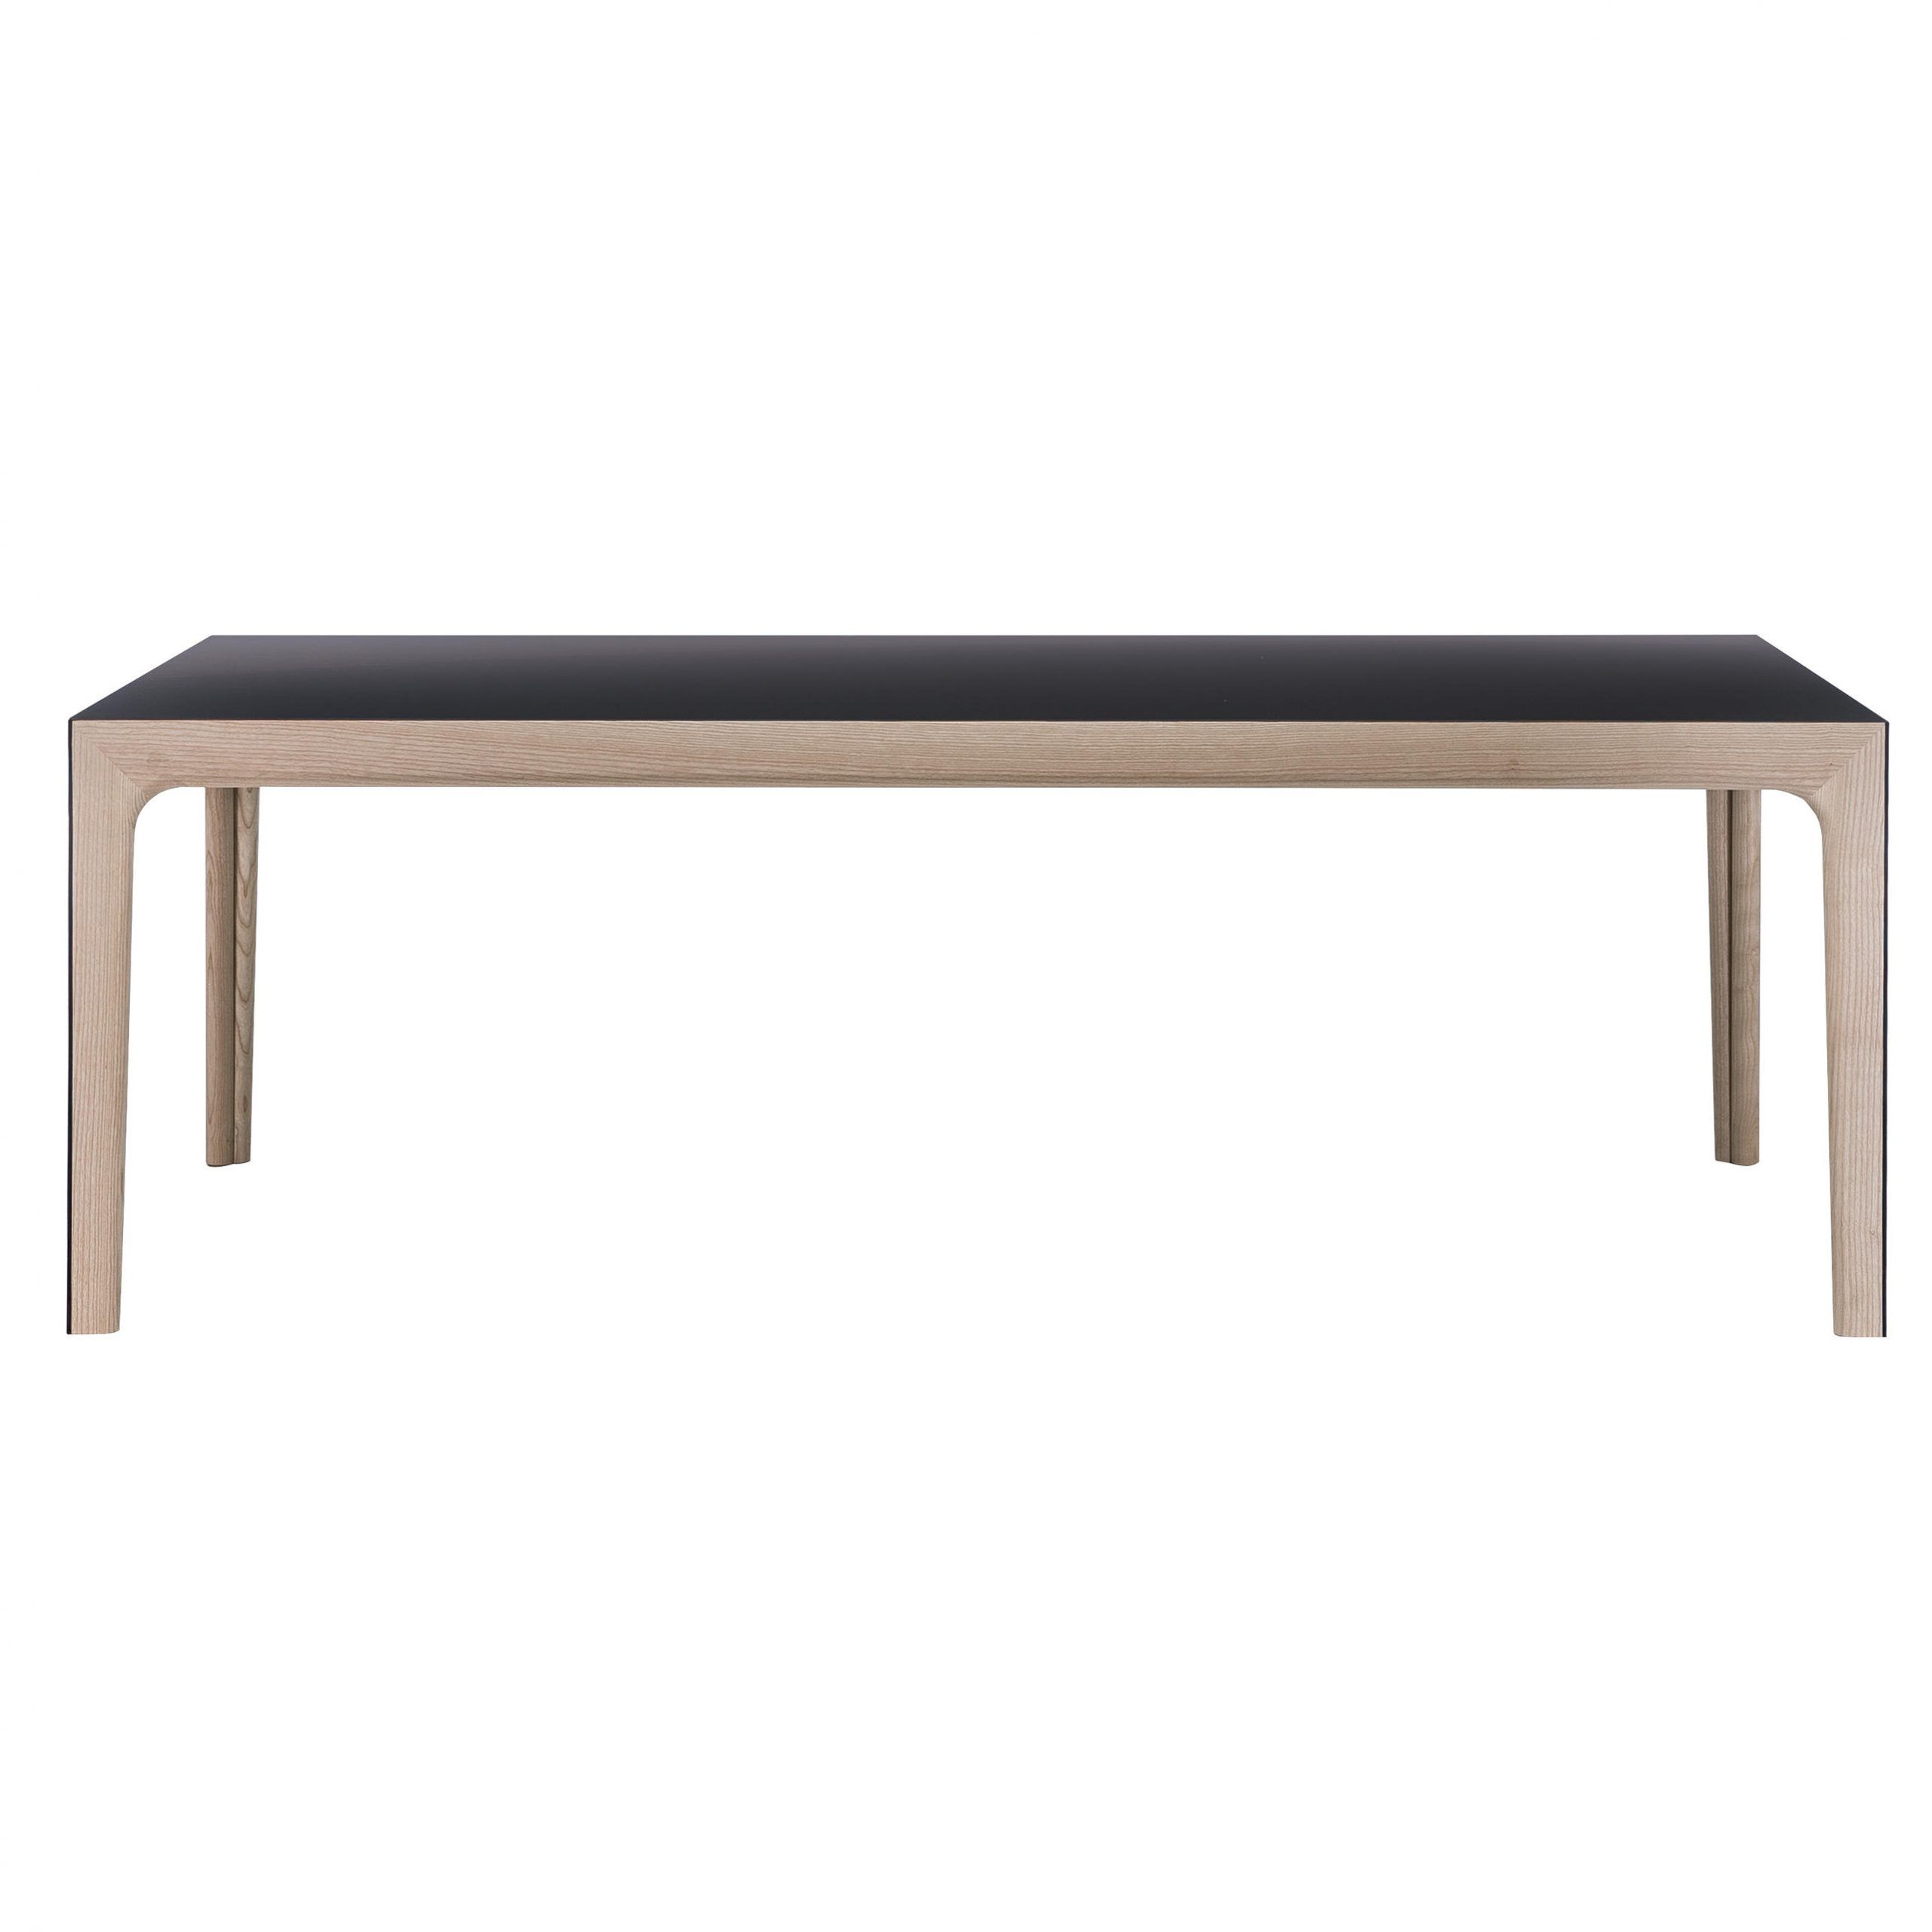 Amalong Table – Dining Tables From Bross | Architonic For Most Current Ingred Extending Dining Tables (View 12 of 25)